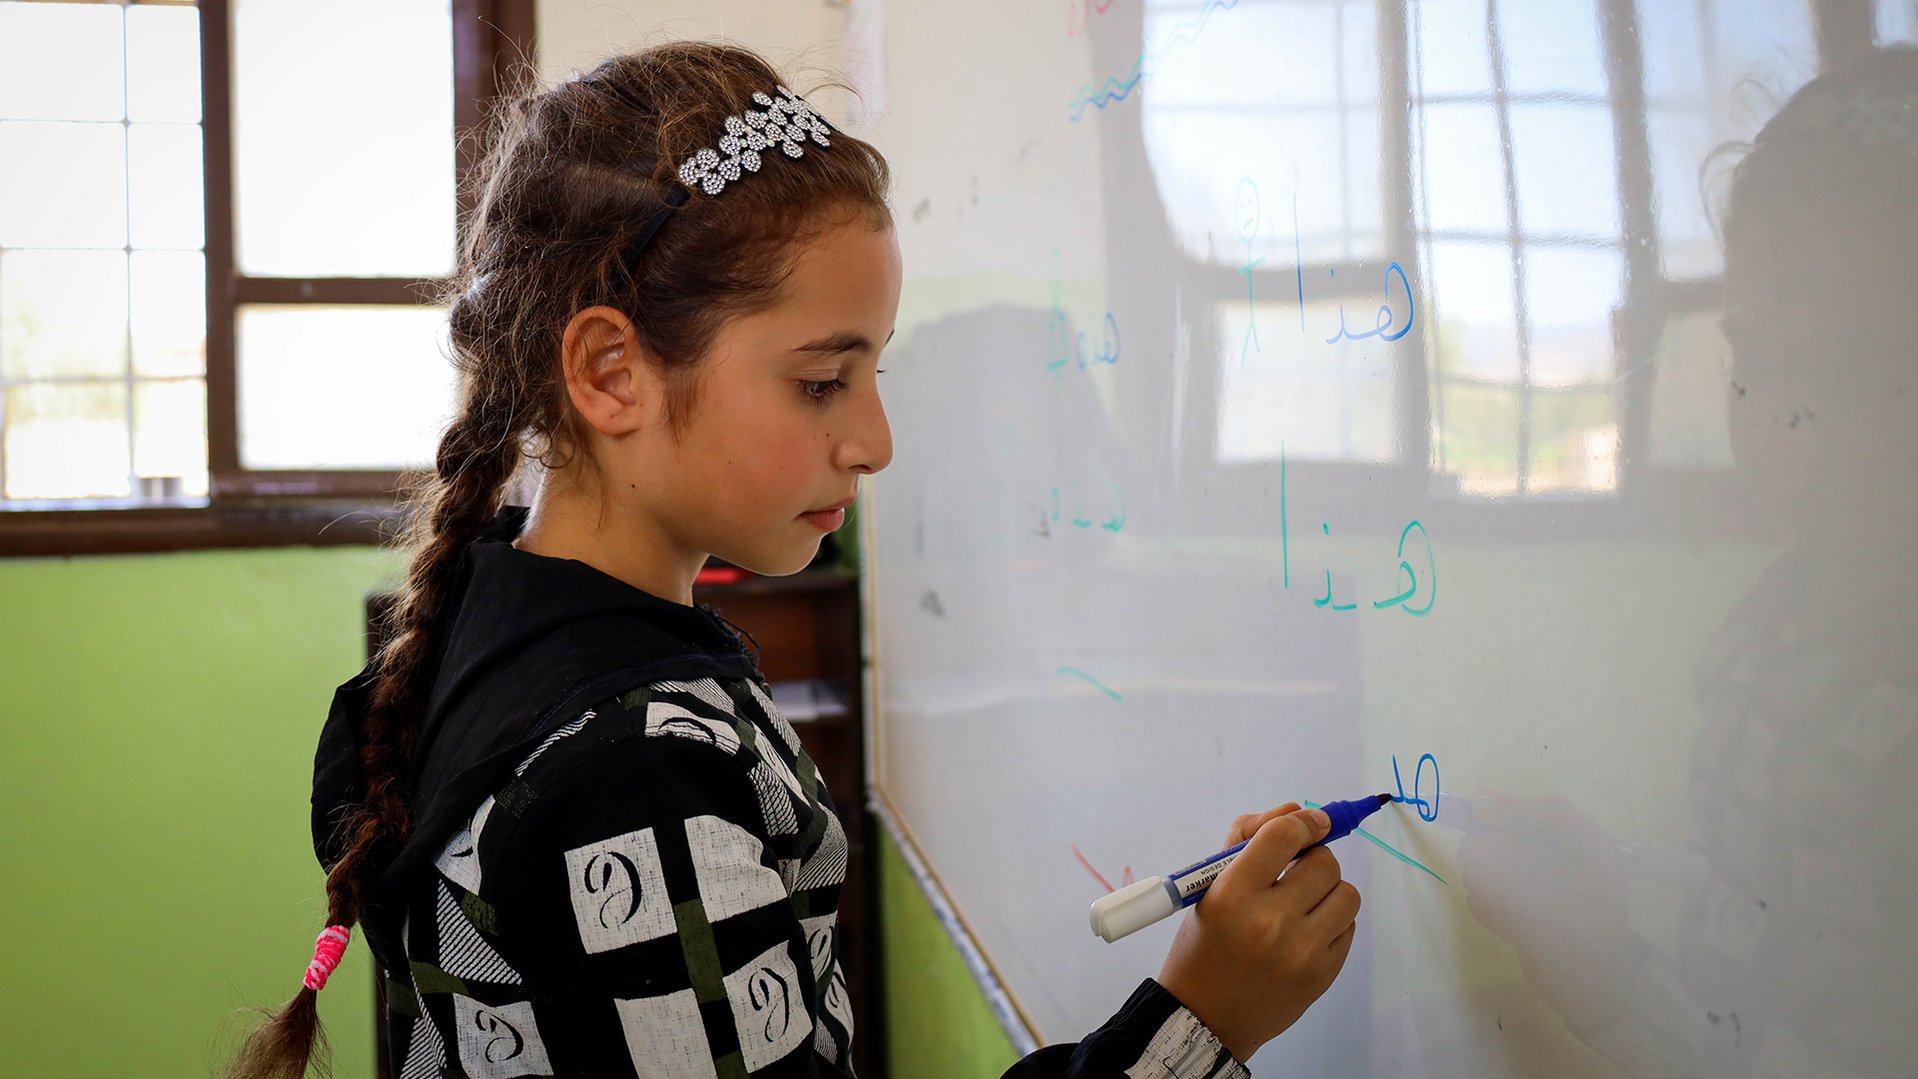 War Child provides catch up education to children affected by the earthquakes in Syria